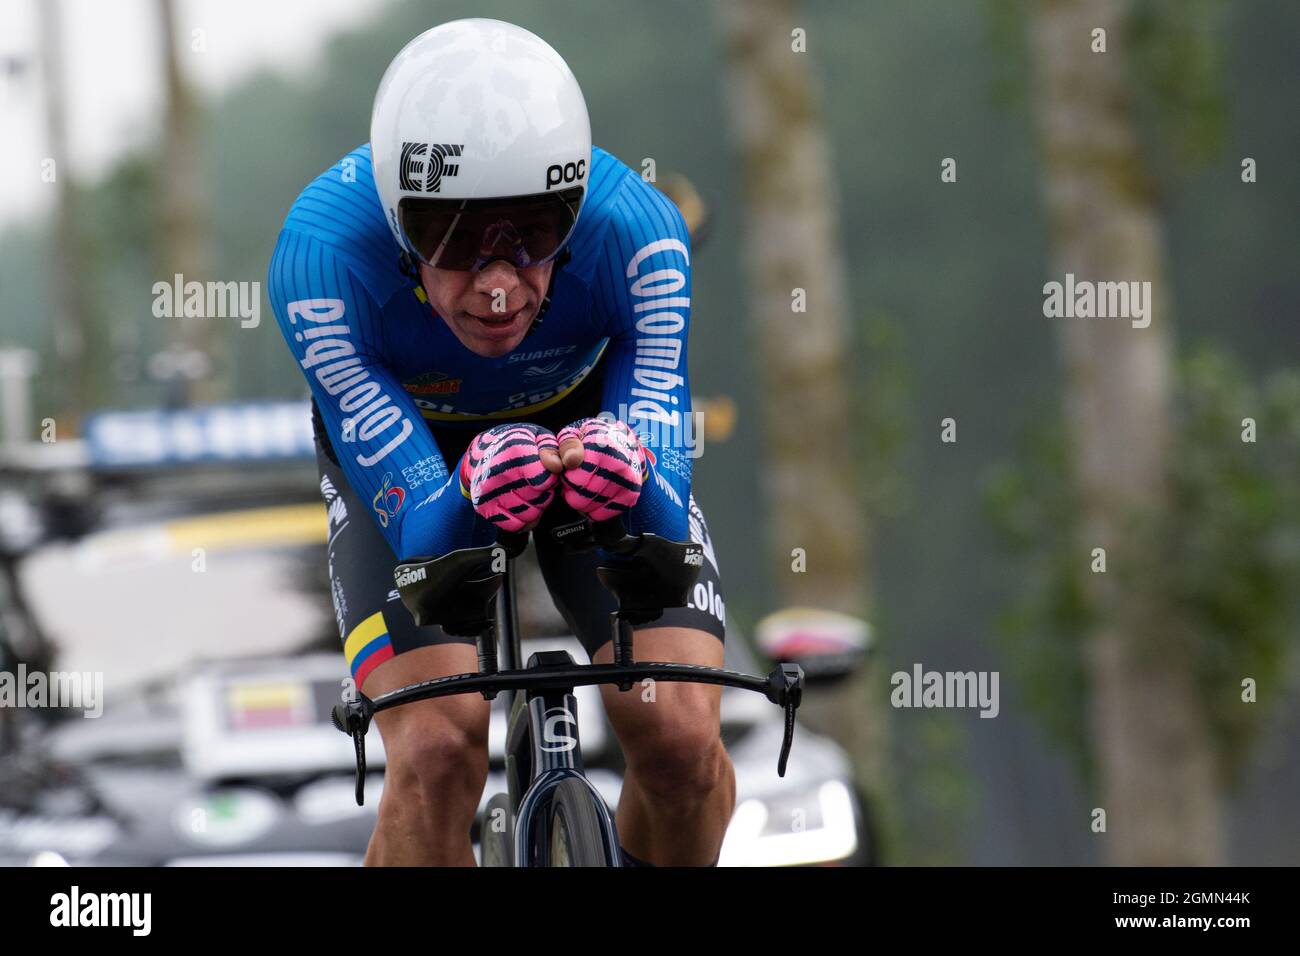 Rigoberto Uran competes in the UCI Road World Championships Elite Men Time Trial Stock Photo